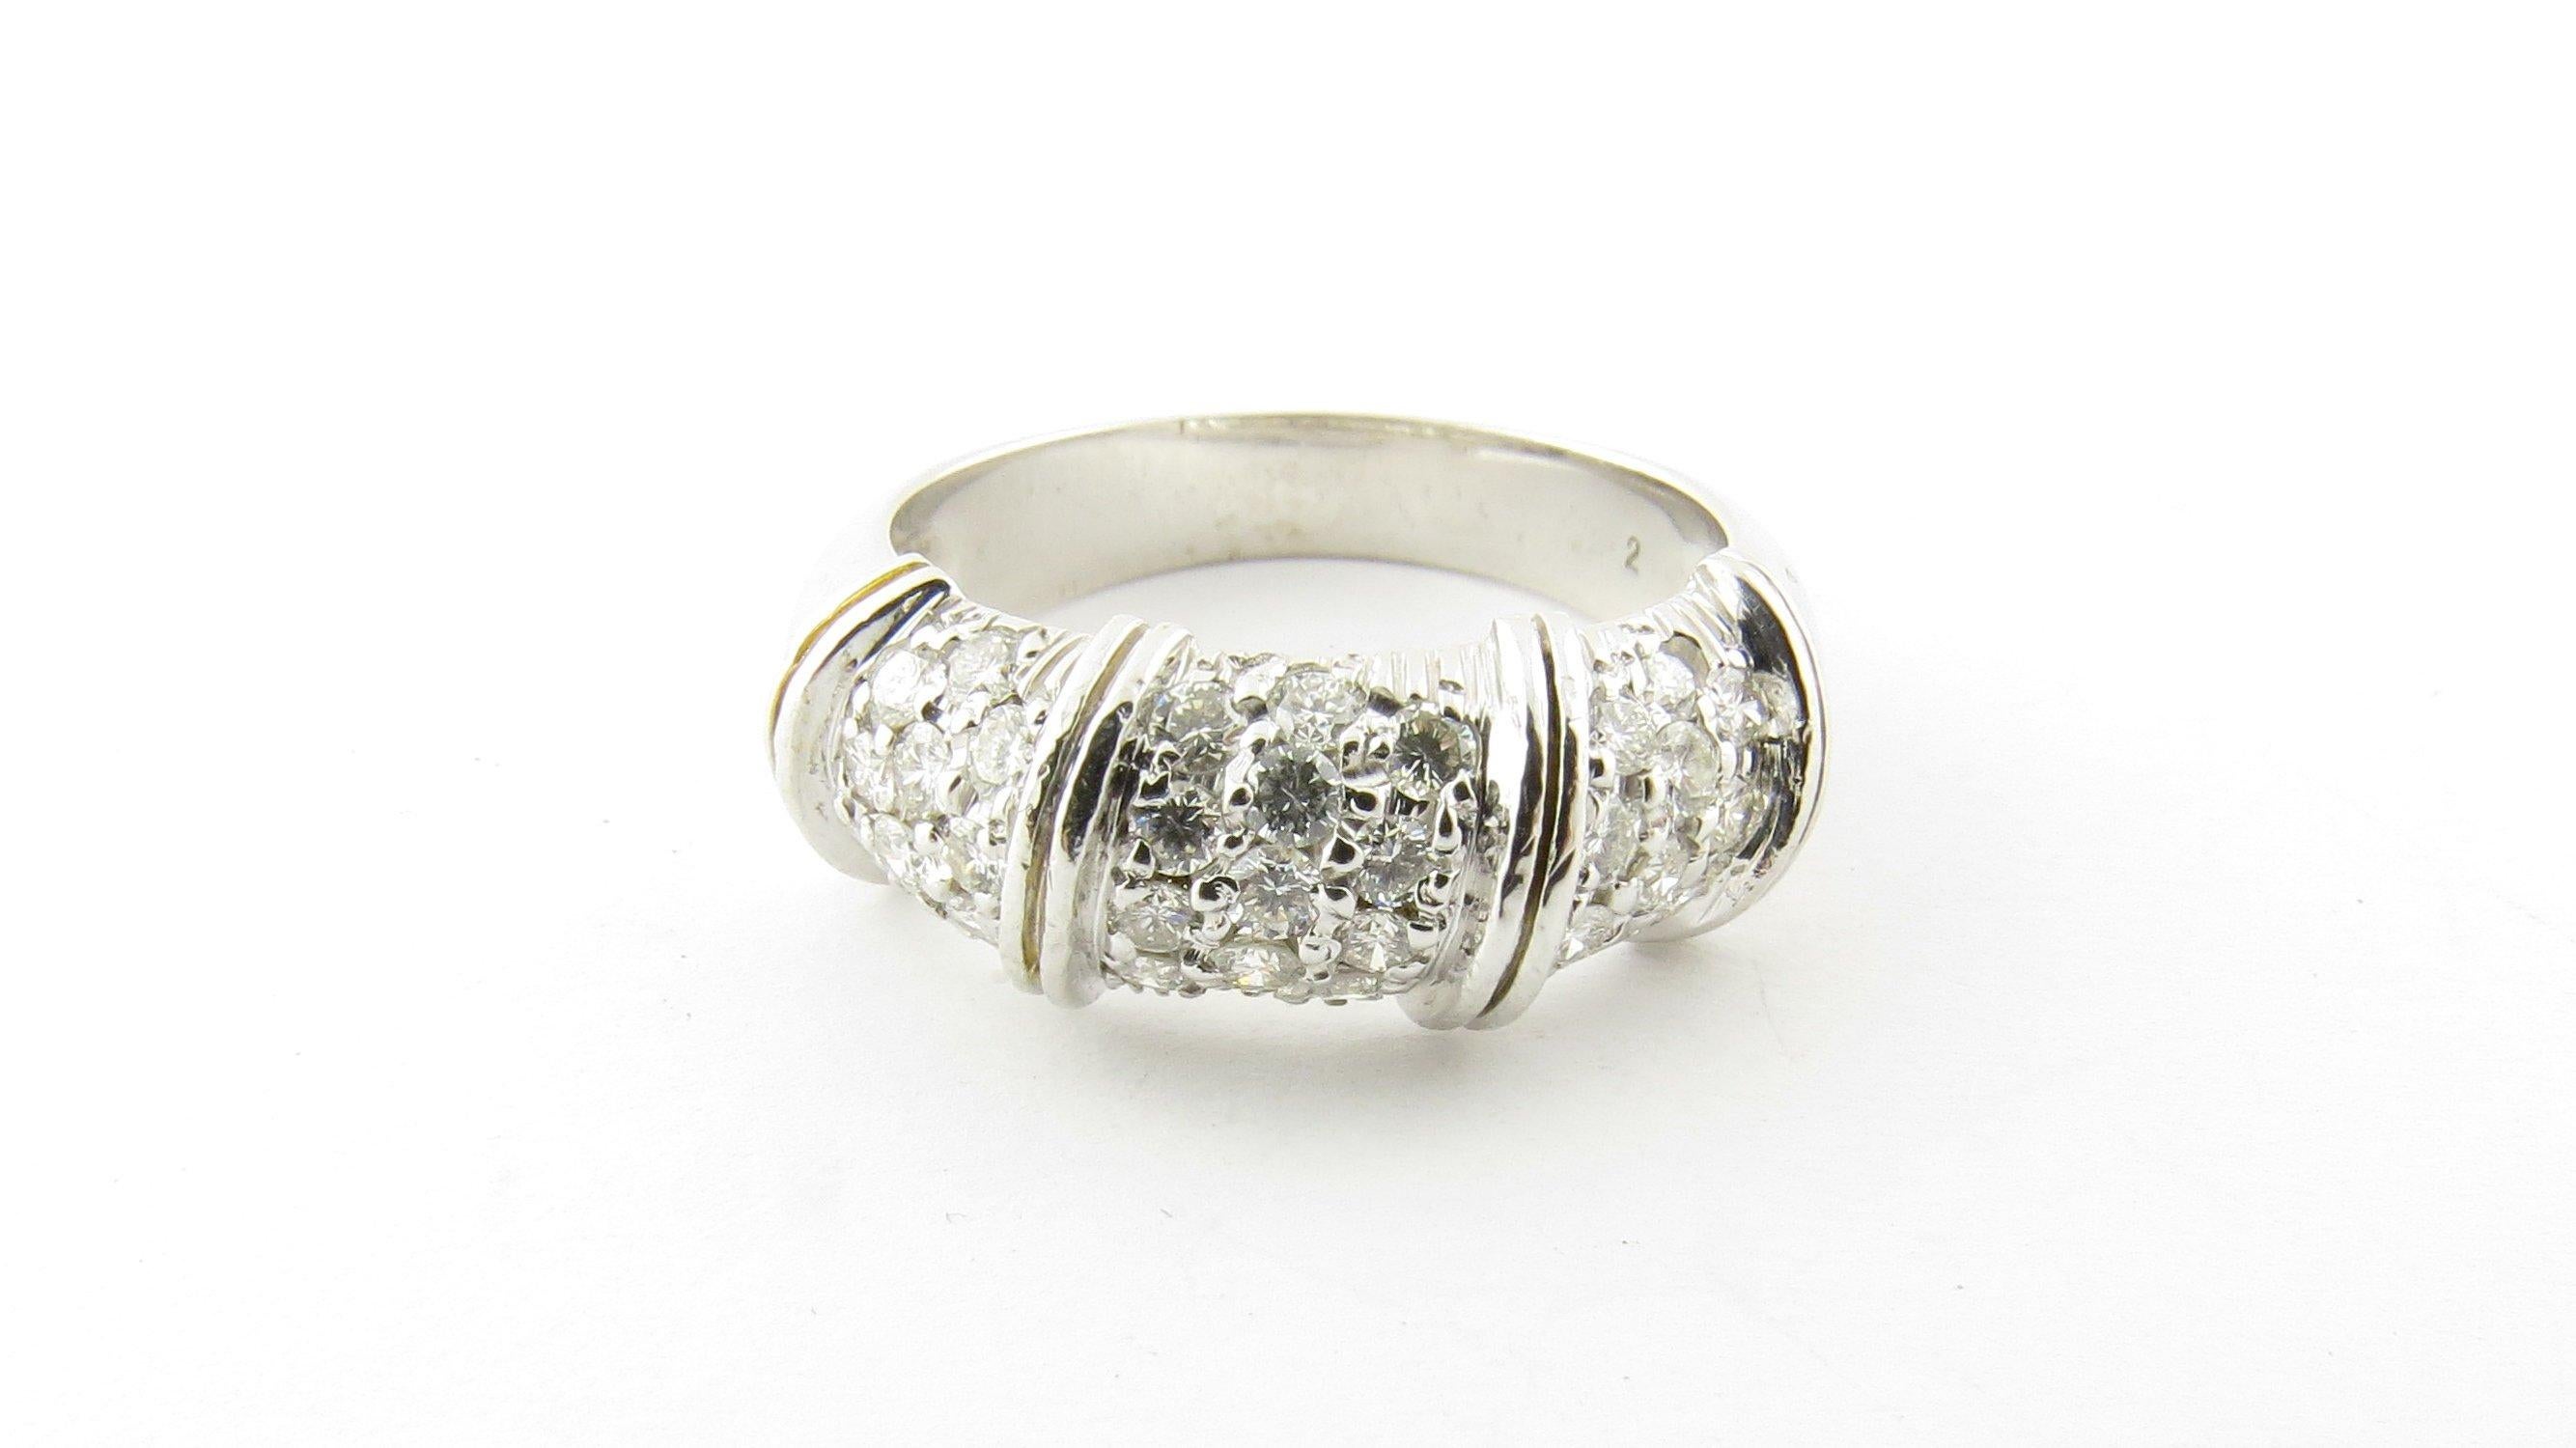 Vintage 18 K White Gold and Diamond Ring Size 6.5-This sparkling ring features 32 round brilliant cut diamonds set in classic 18K white gold. Width: 8 mm. Shank measures 3.5 mm. Approximate total diamond weight: .64 ct. Diamond color: G-H Diamond